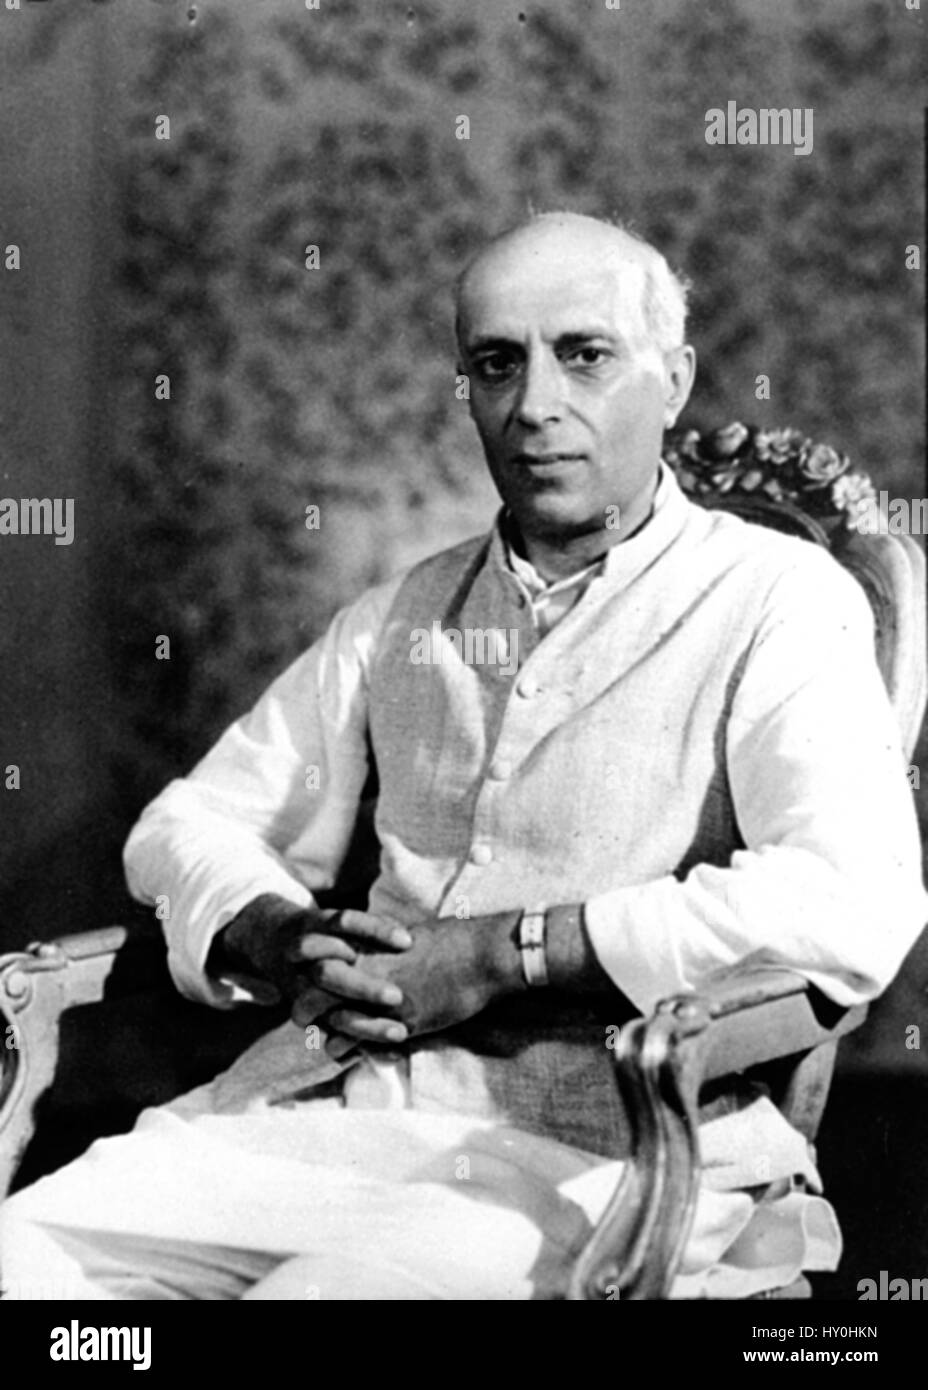 The Indian Politician And Prime Minister Jawaharlal Nehru Black And